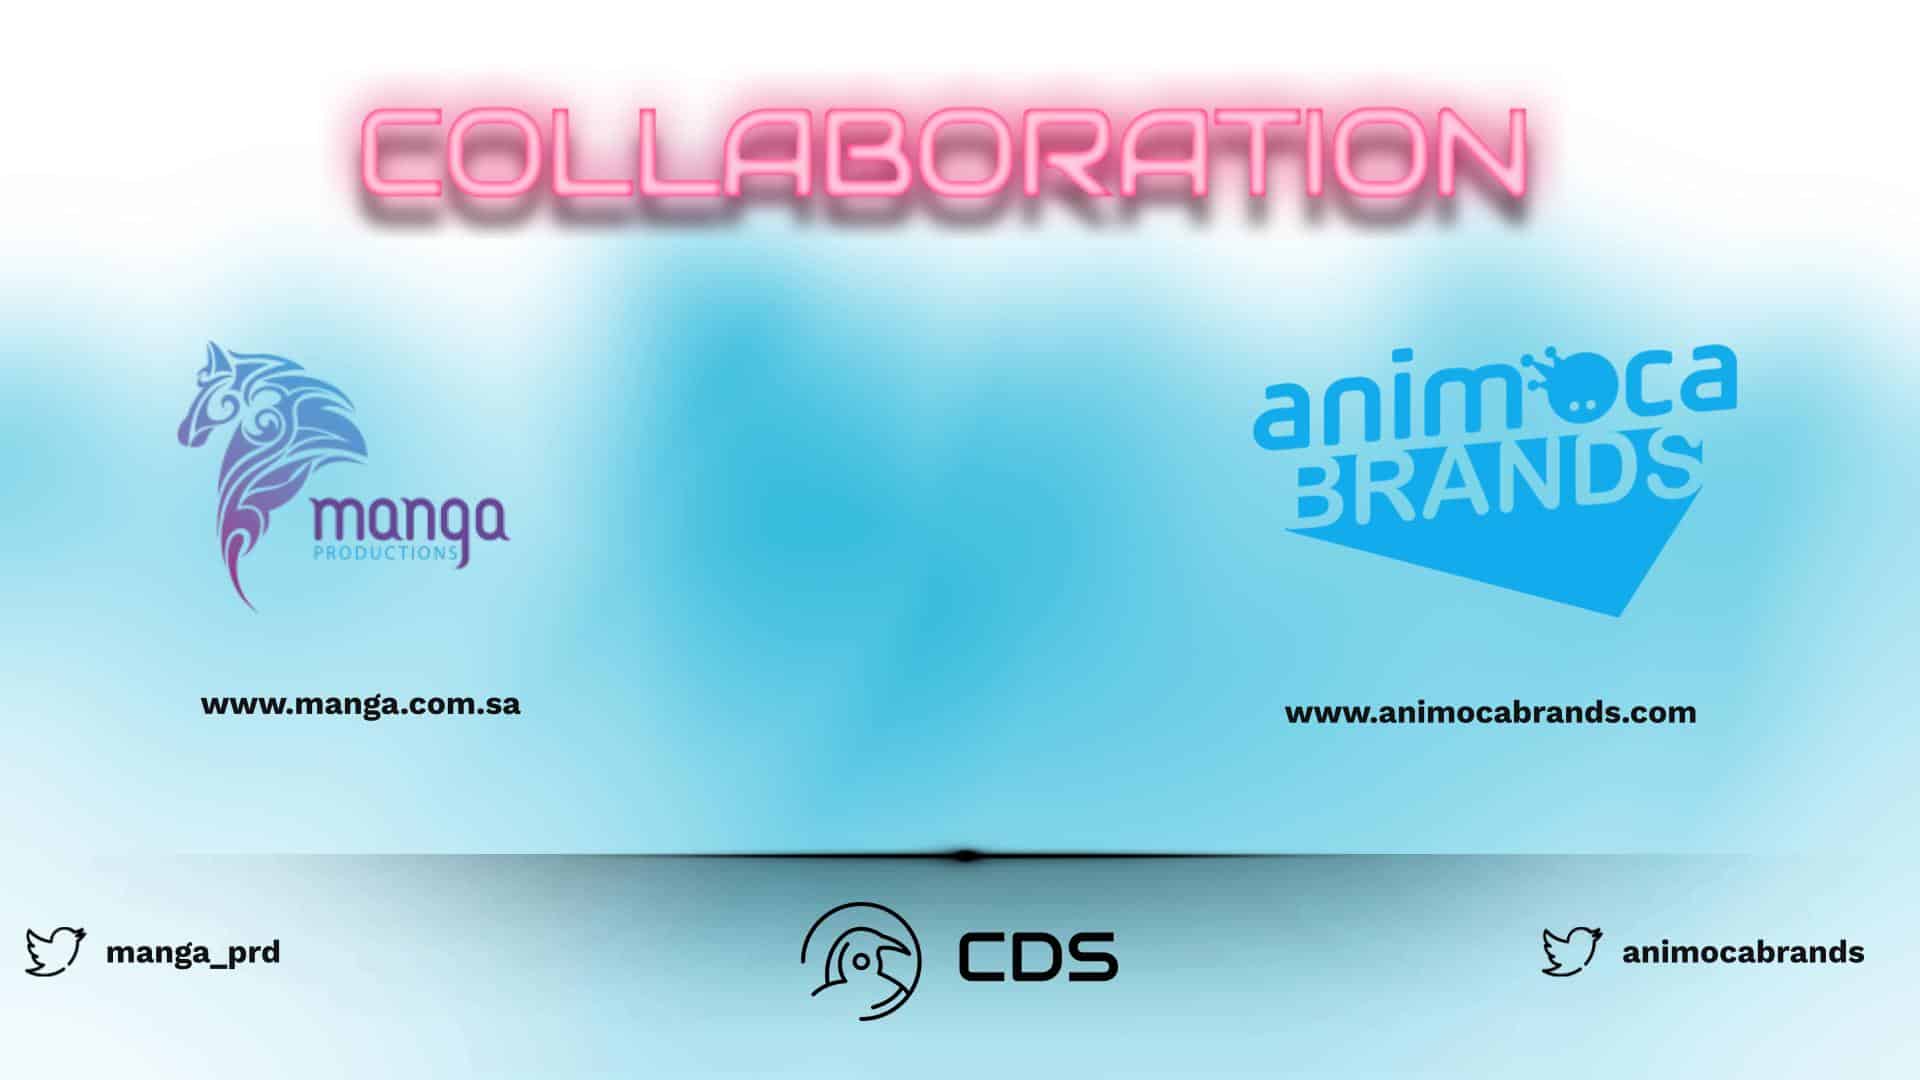 Manga Collaborates with Animoca Brands To Dominate MENA Web3 Sector